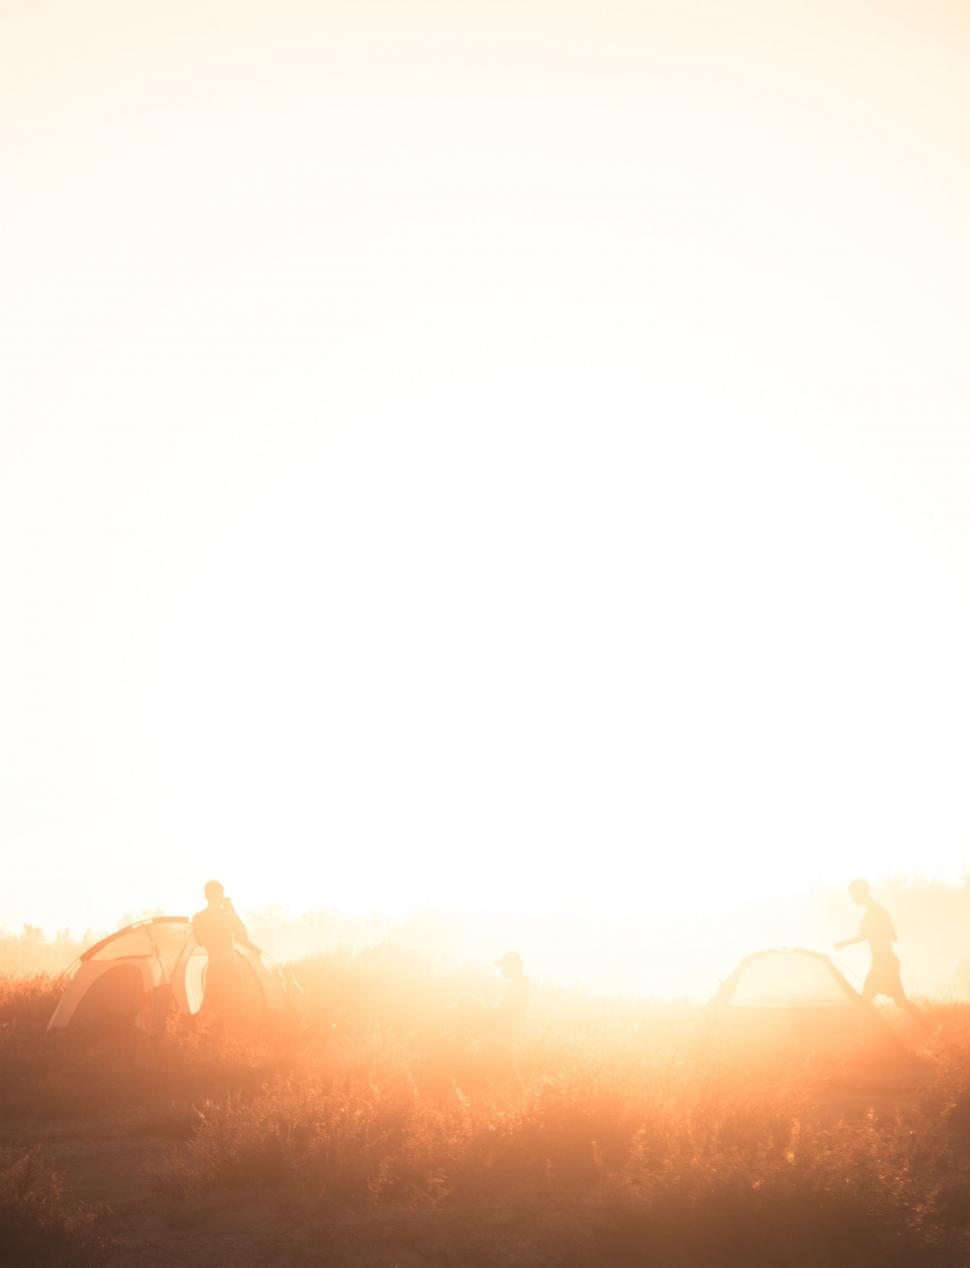 Free Image of Group of People Riding Horses Across Field 